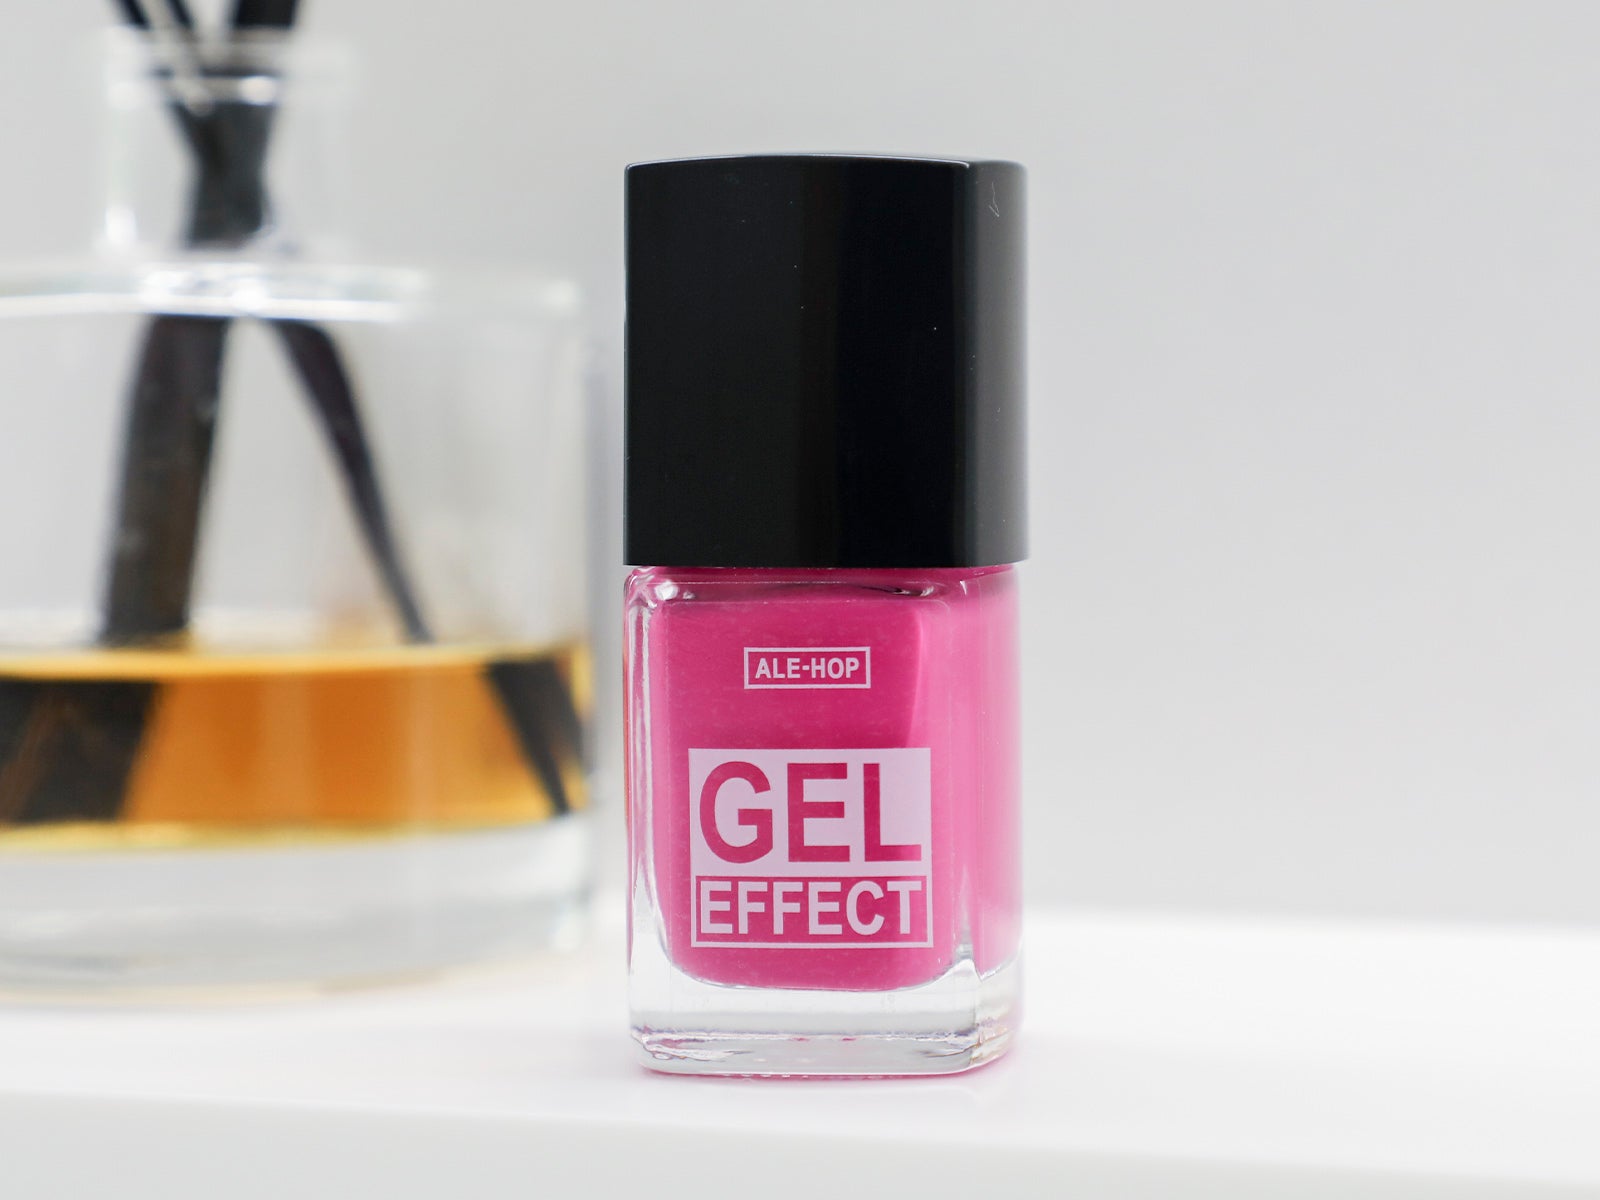 GLAM Glass Effect | The Nail Art School